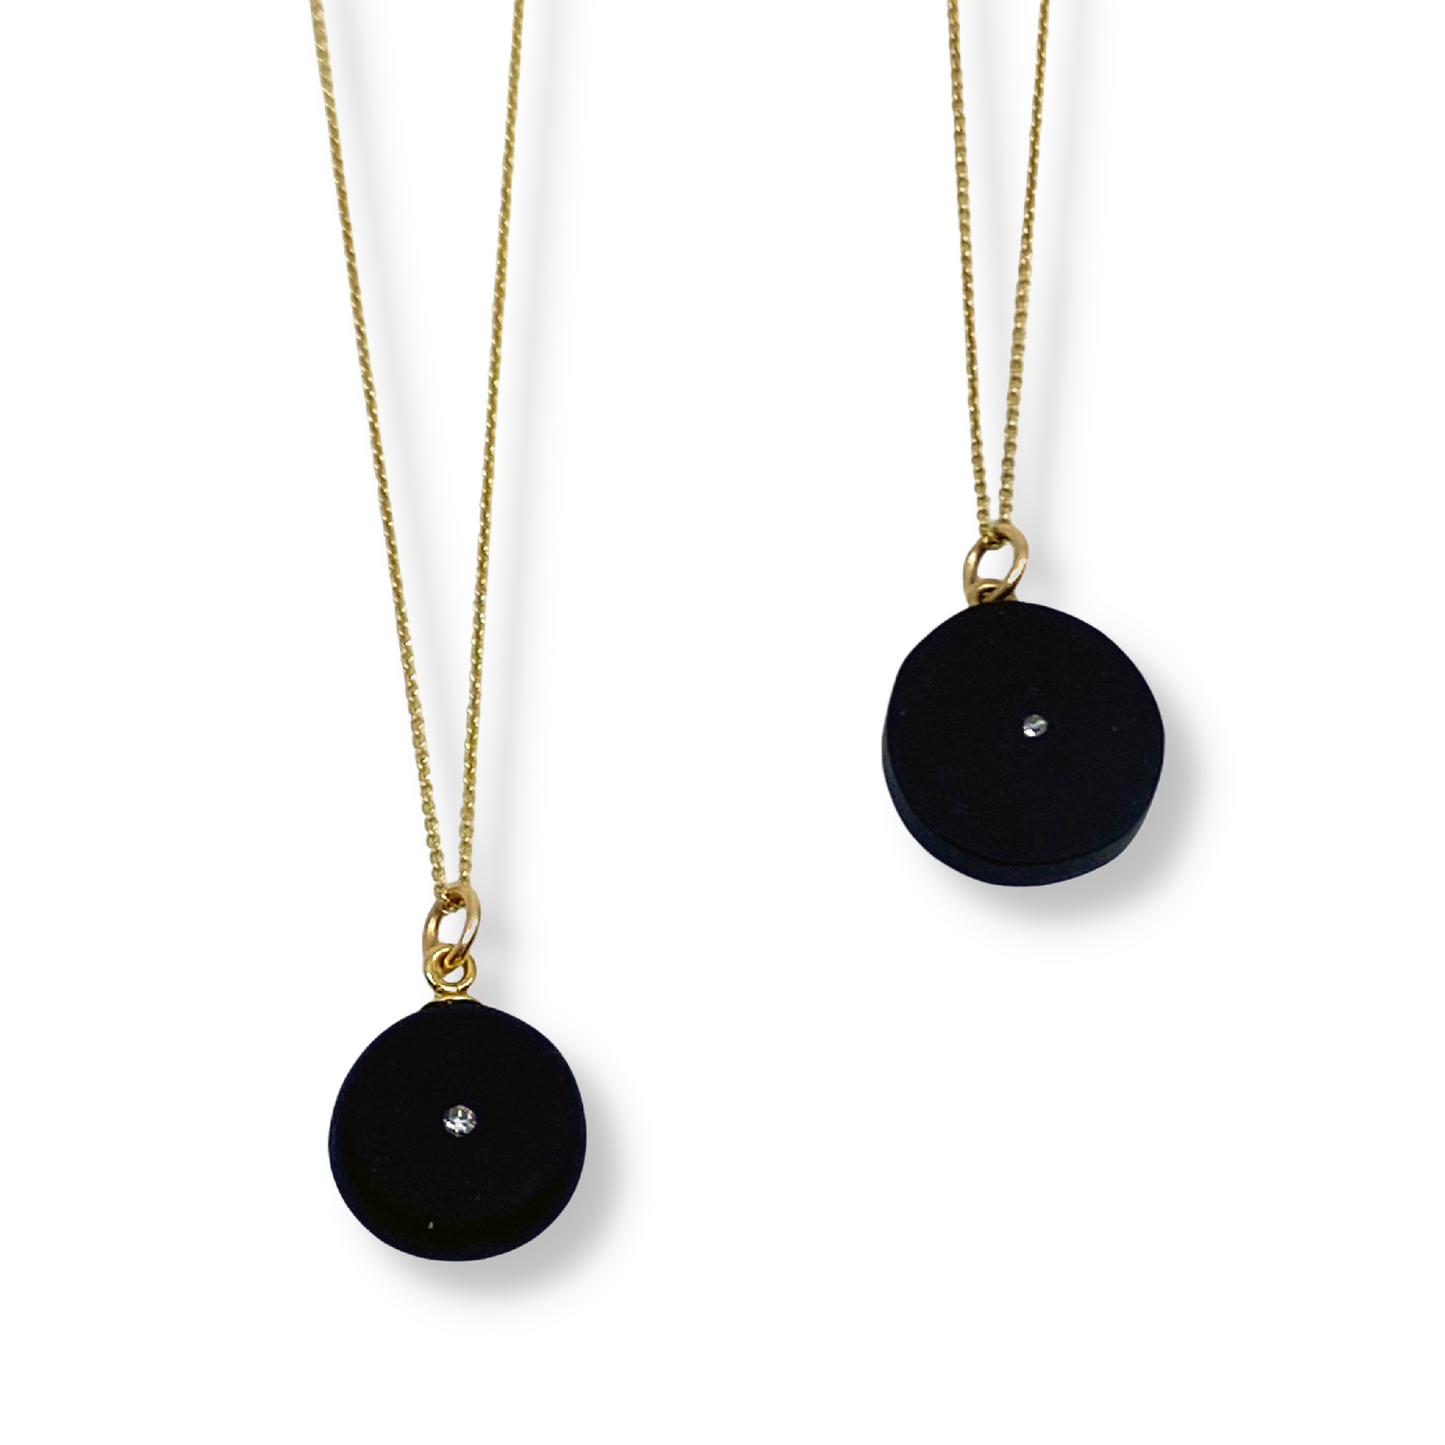 Load image into Gallery viewer, Two round black stone pendant necklaces with diamond accent on white background.
